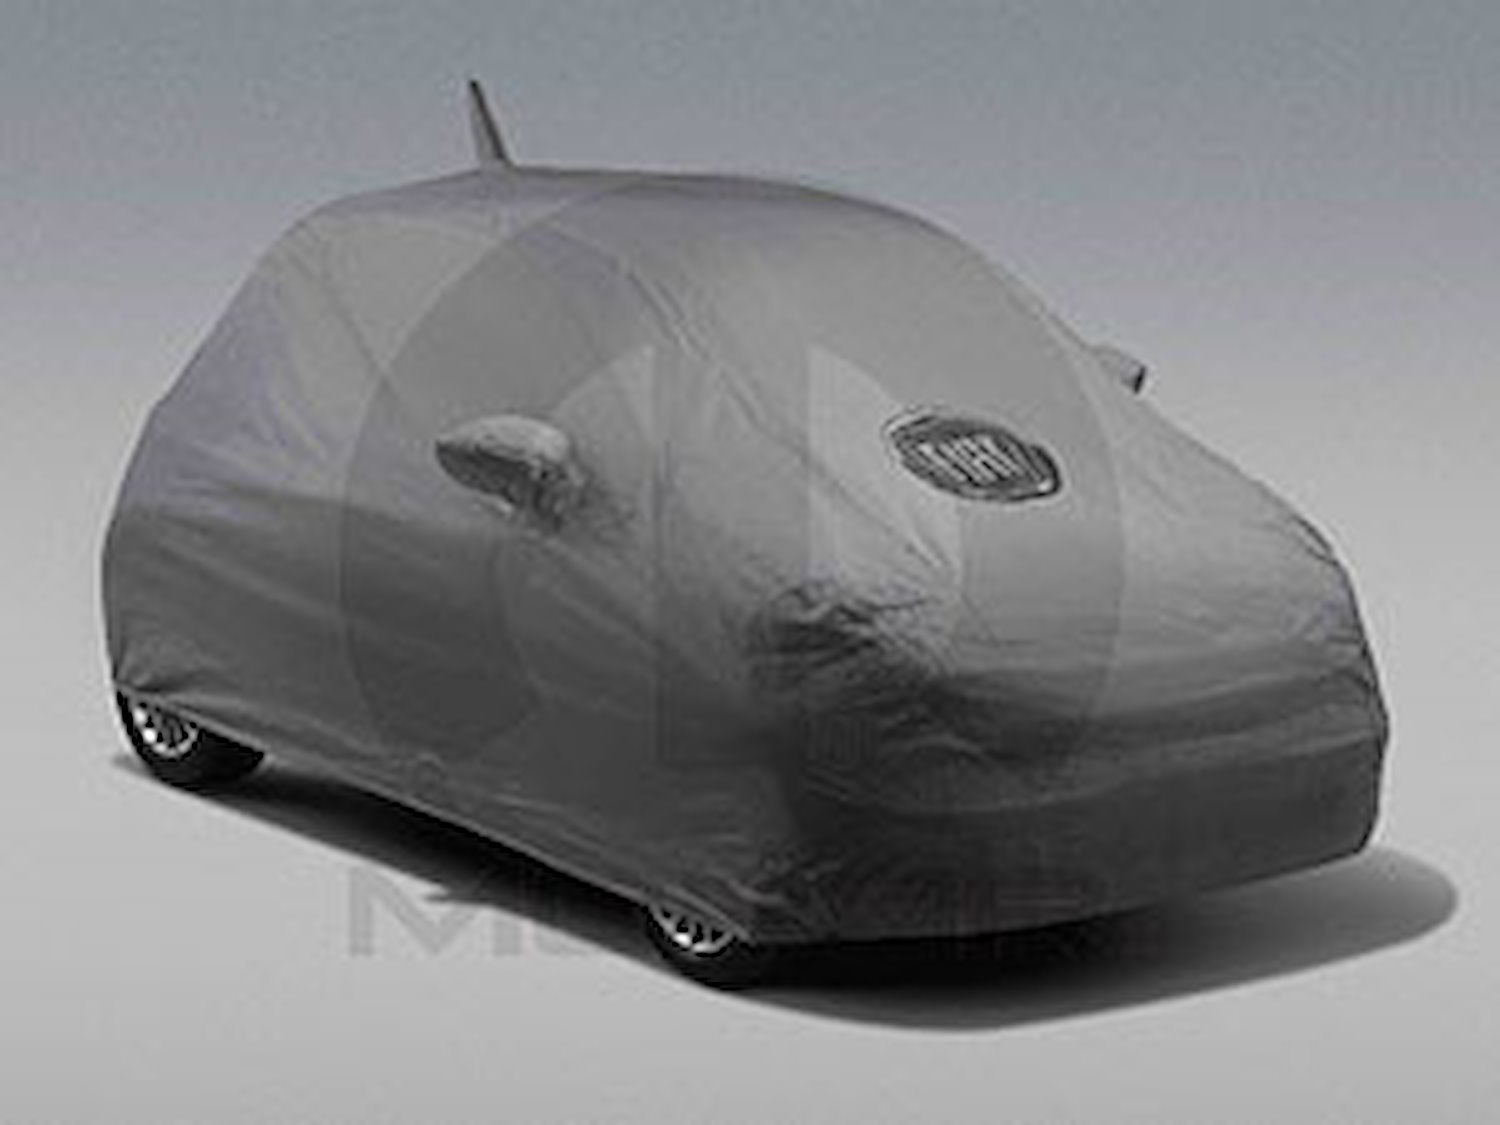 Full Vehicle Cover 2012-13 Fiat 500 Cabrio/Coupe